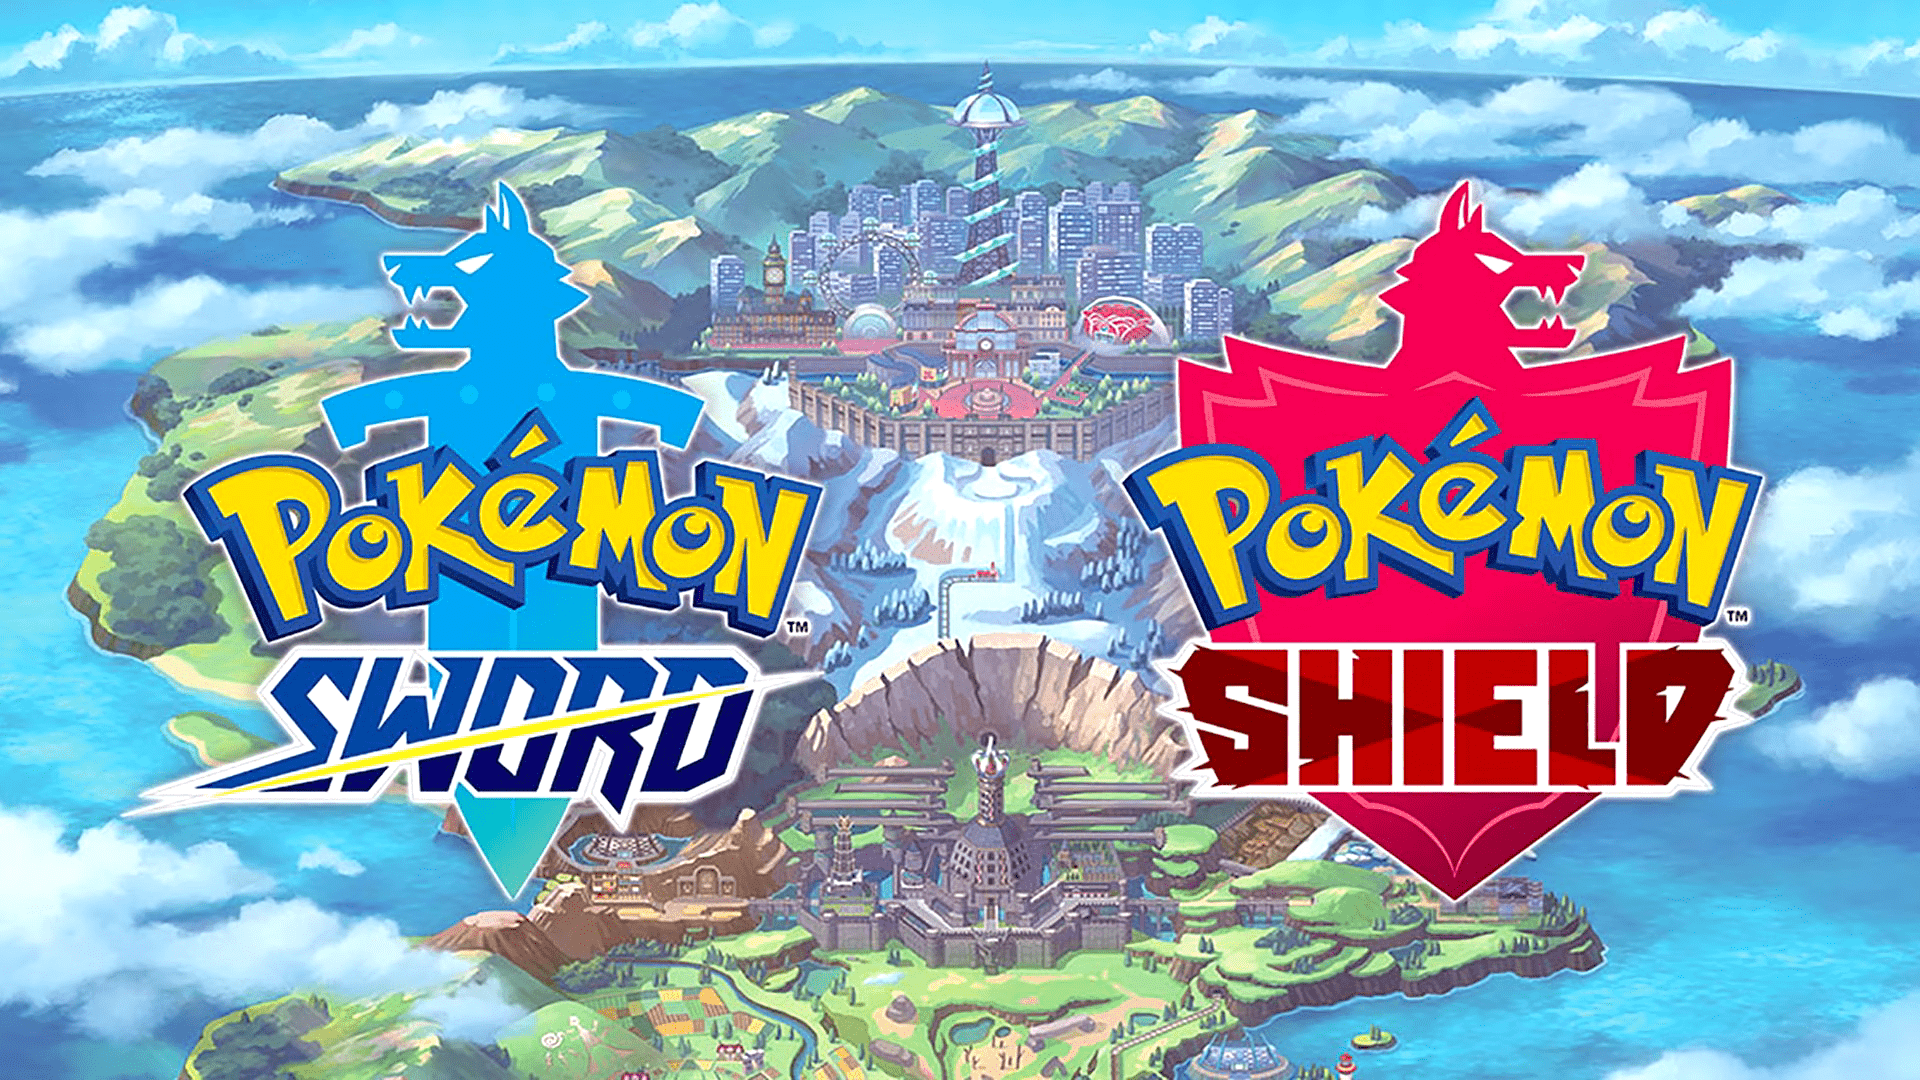 Details About Pokemon Sword & Shield's Wild Area Have Been